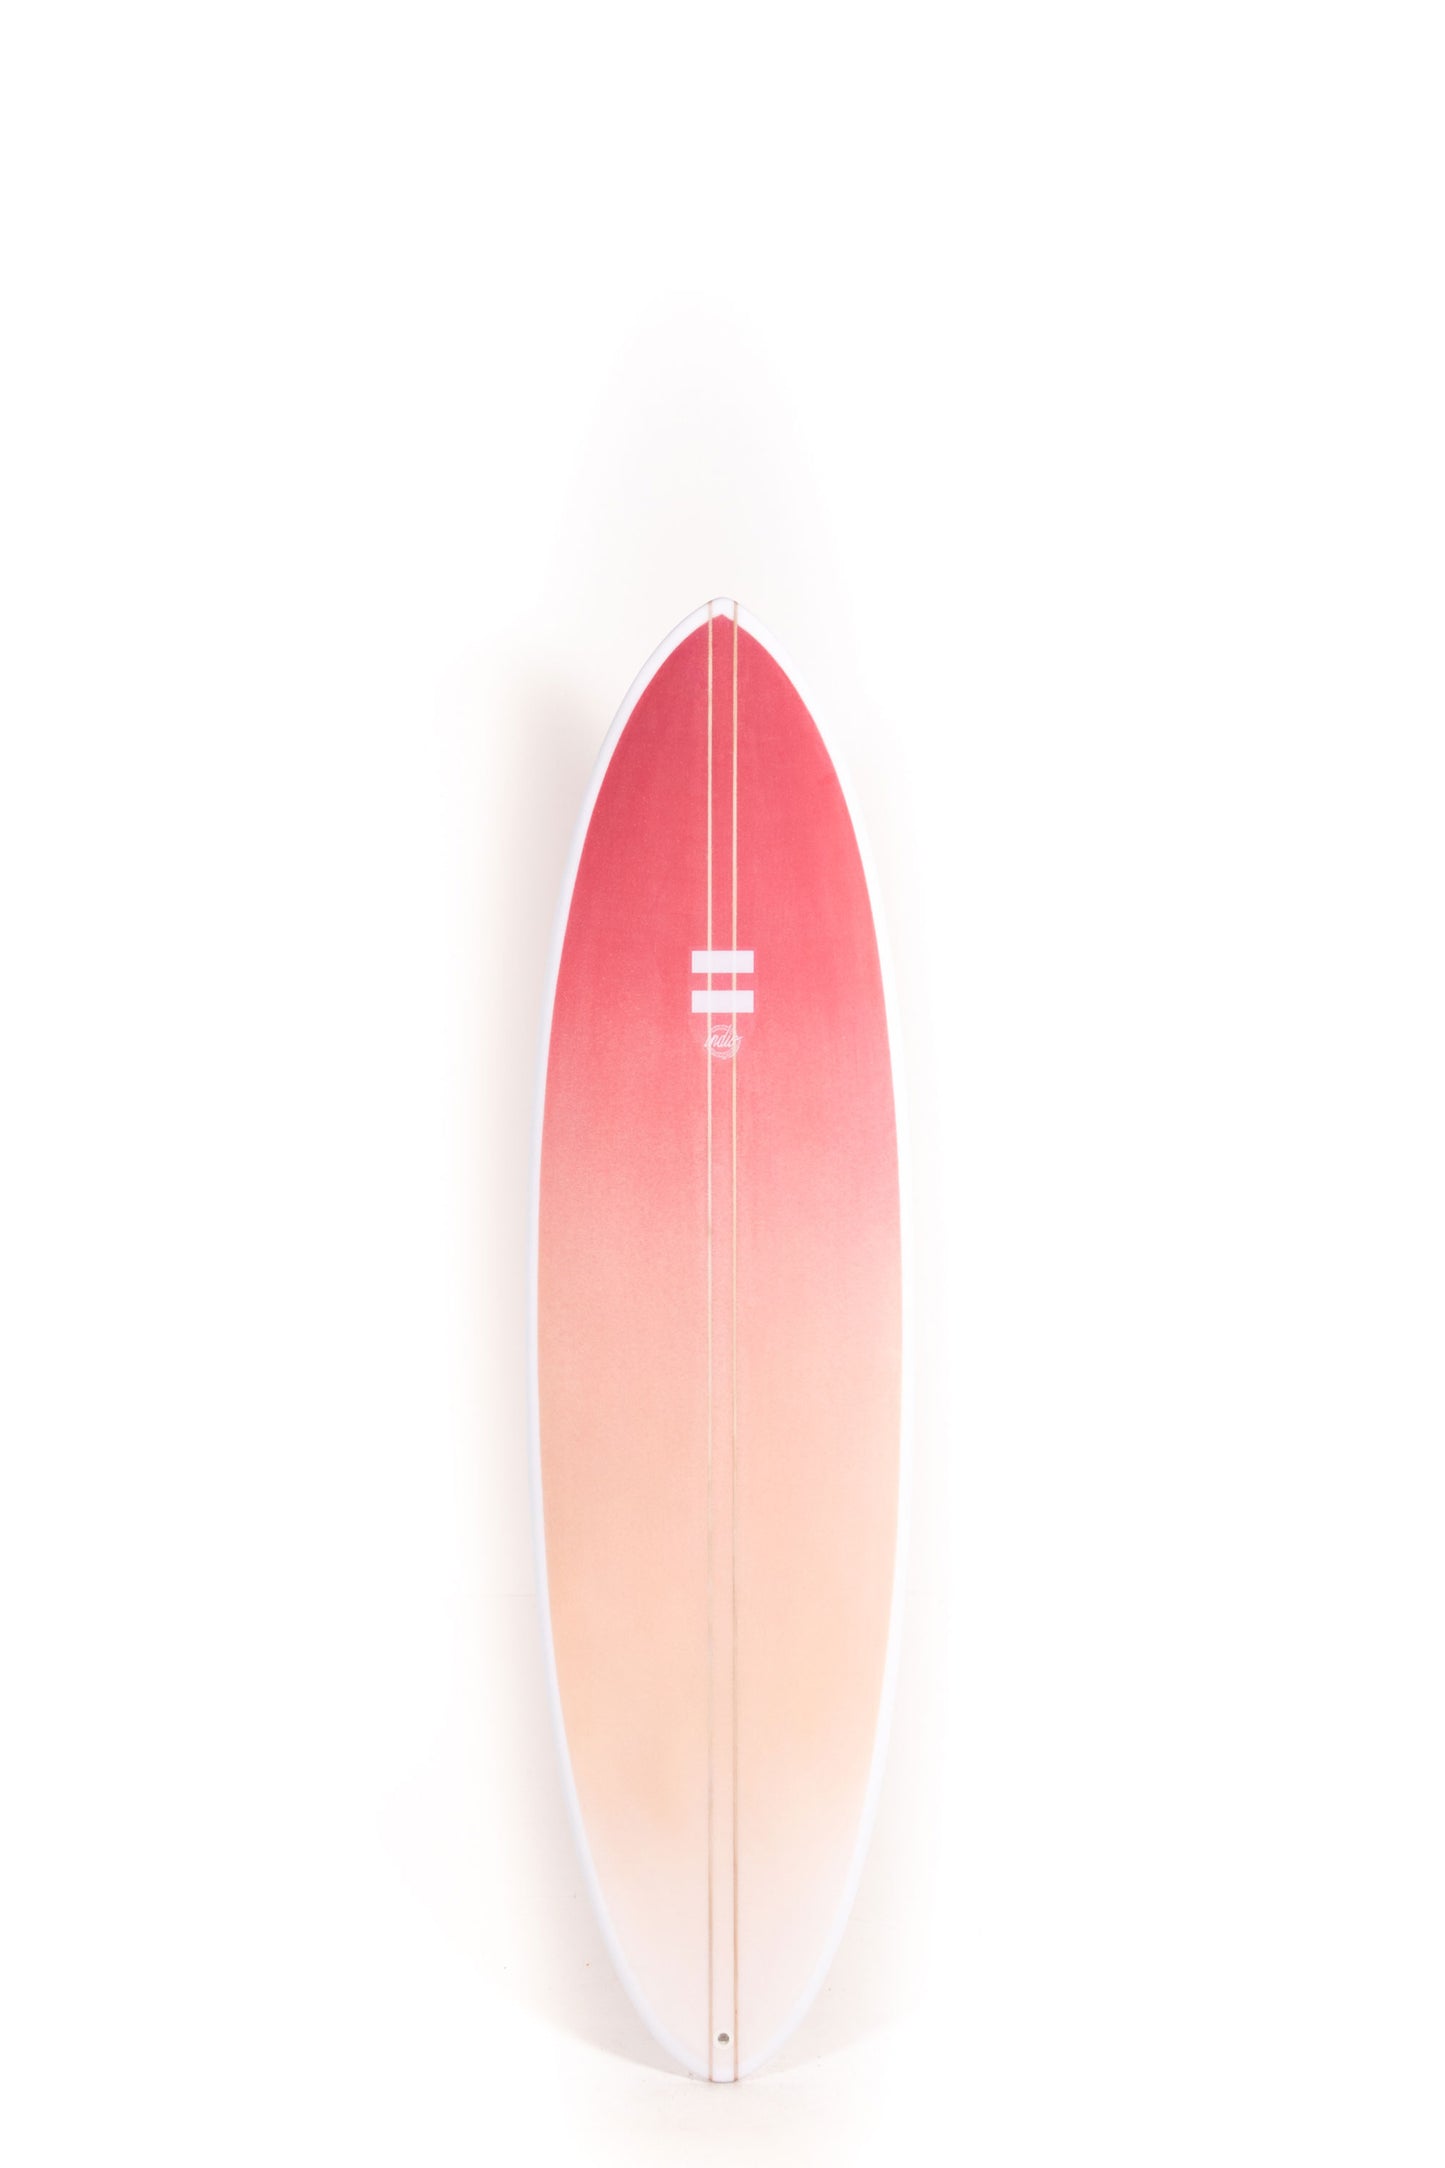 Pukas-Surf-Shop-Indio-Surfboards-The-Egg-red-6_8